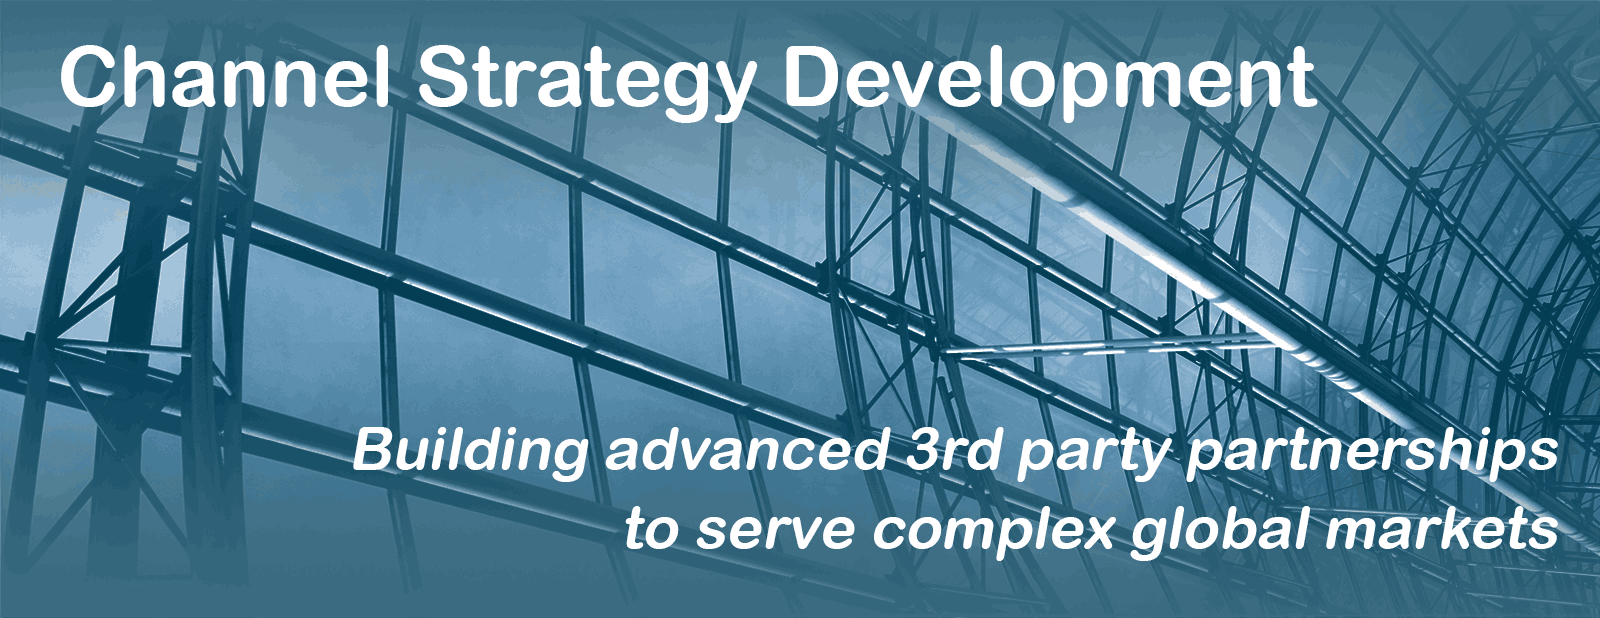 Channel Strategy Development - Building advanced 3rd part partnerships to serve complex global markets